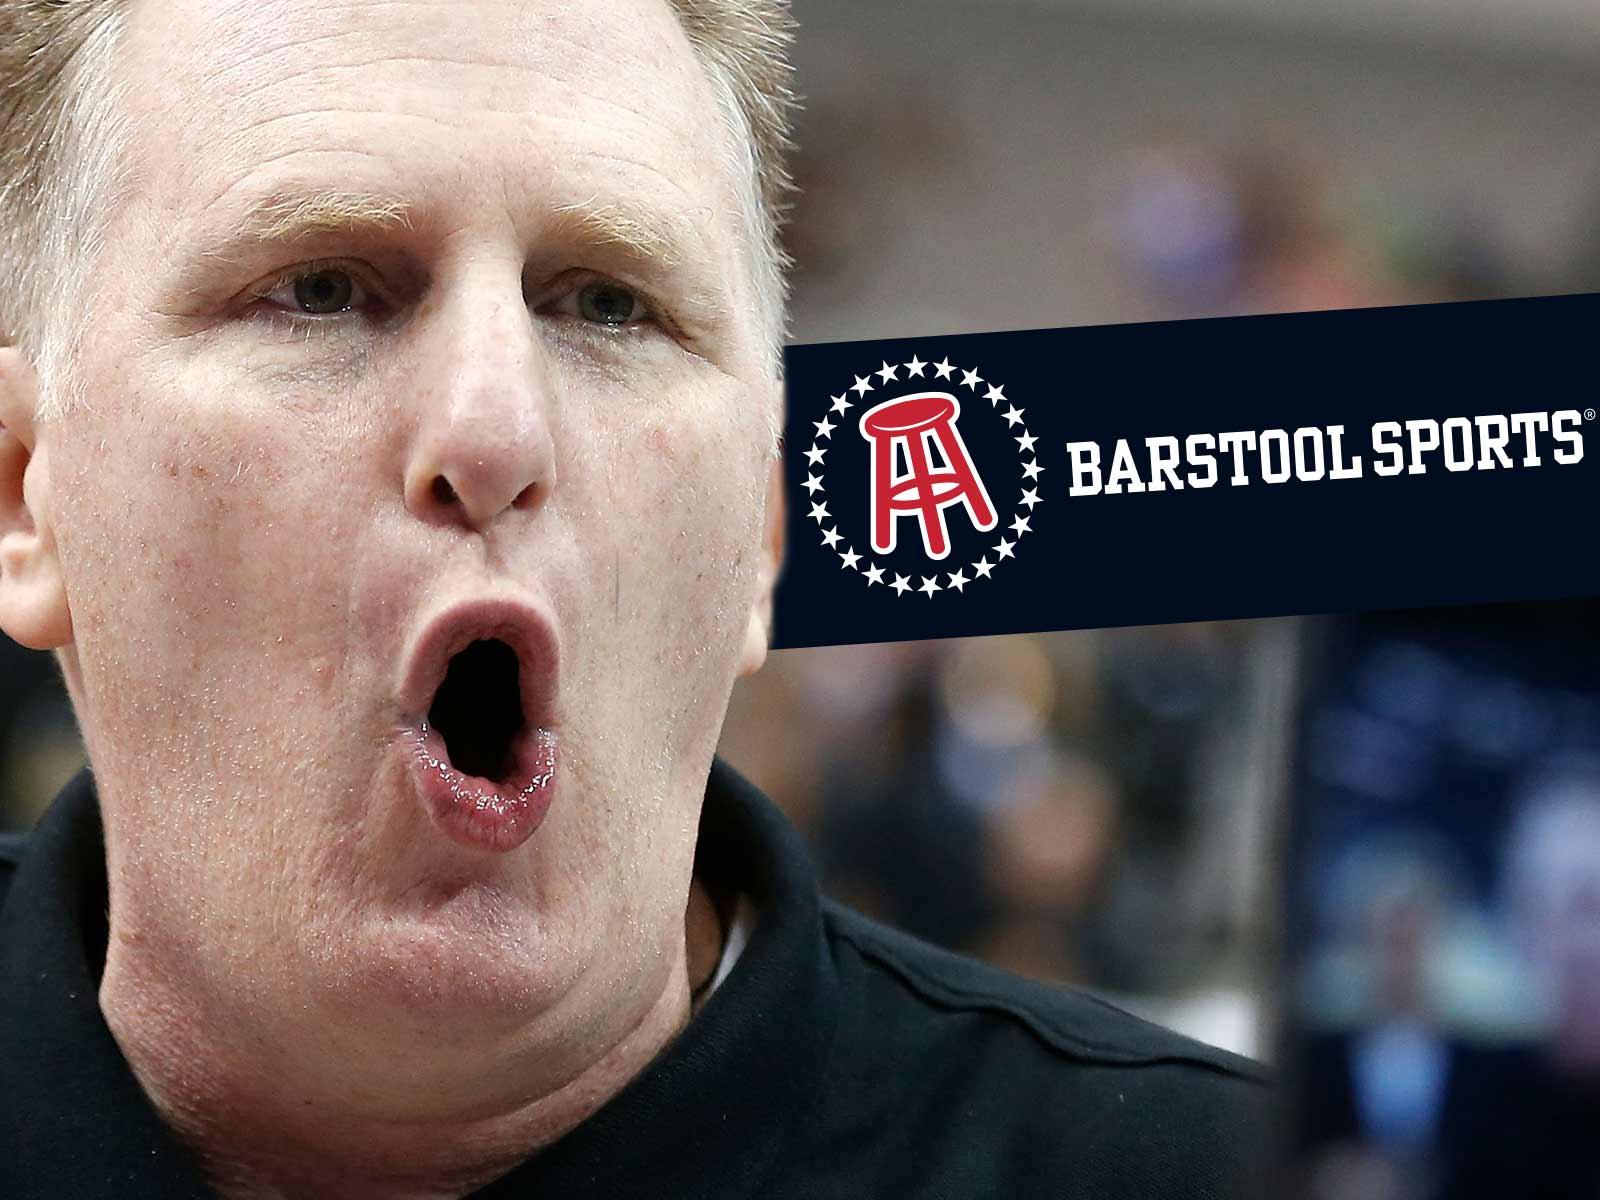 Michael Rapaport Sues Barstool Sports for $375,000 Over Volatile Split & Herpes Allegation